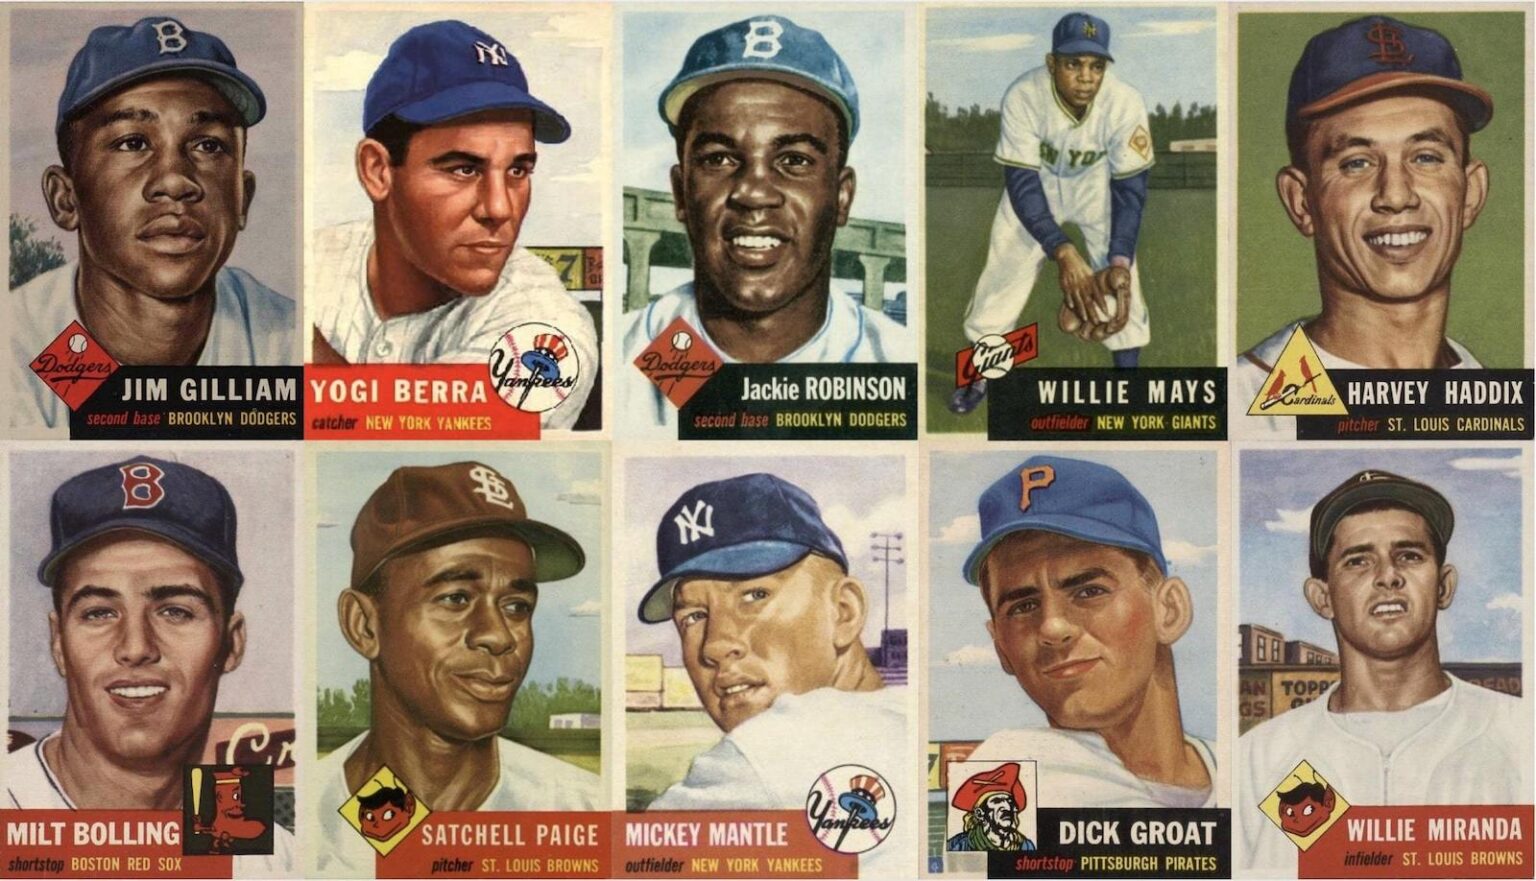 Baseball cards had humble origins. Now, baseball cards are a multibillion-dollar industry. Discover the most valuable rookie baseball cards from the 50s.